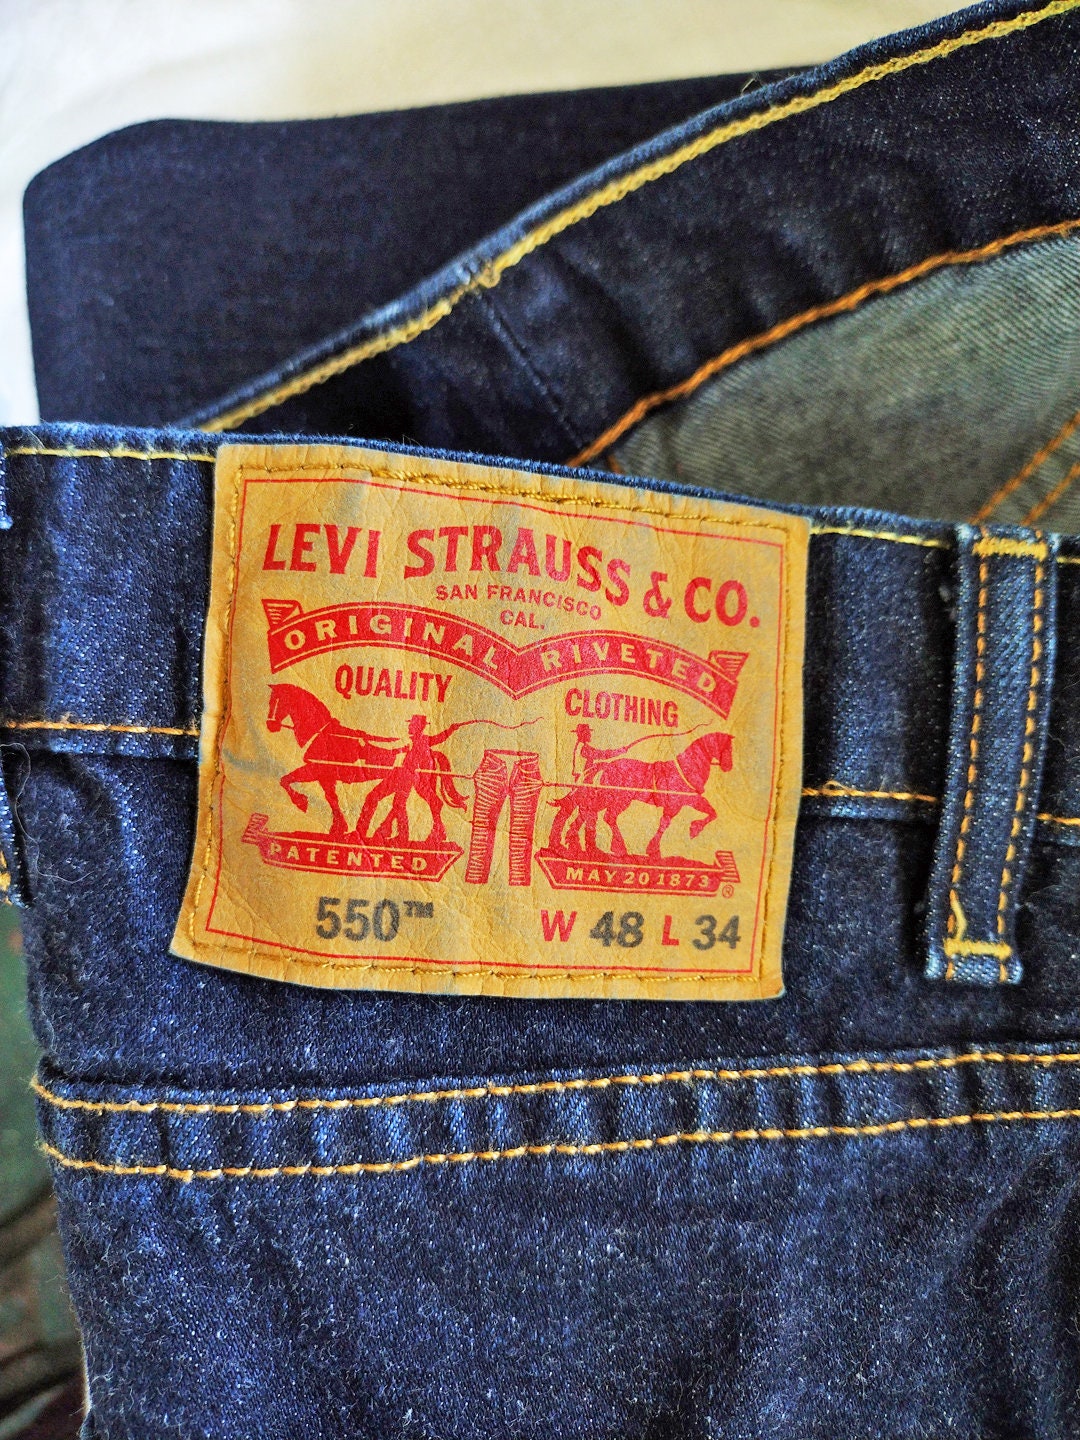 Levis Jeans Big and Tall Jeans Size 48 Jeans All Cotton Dark - Etsy